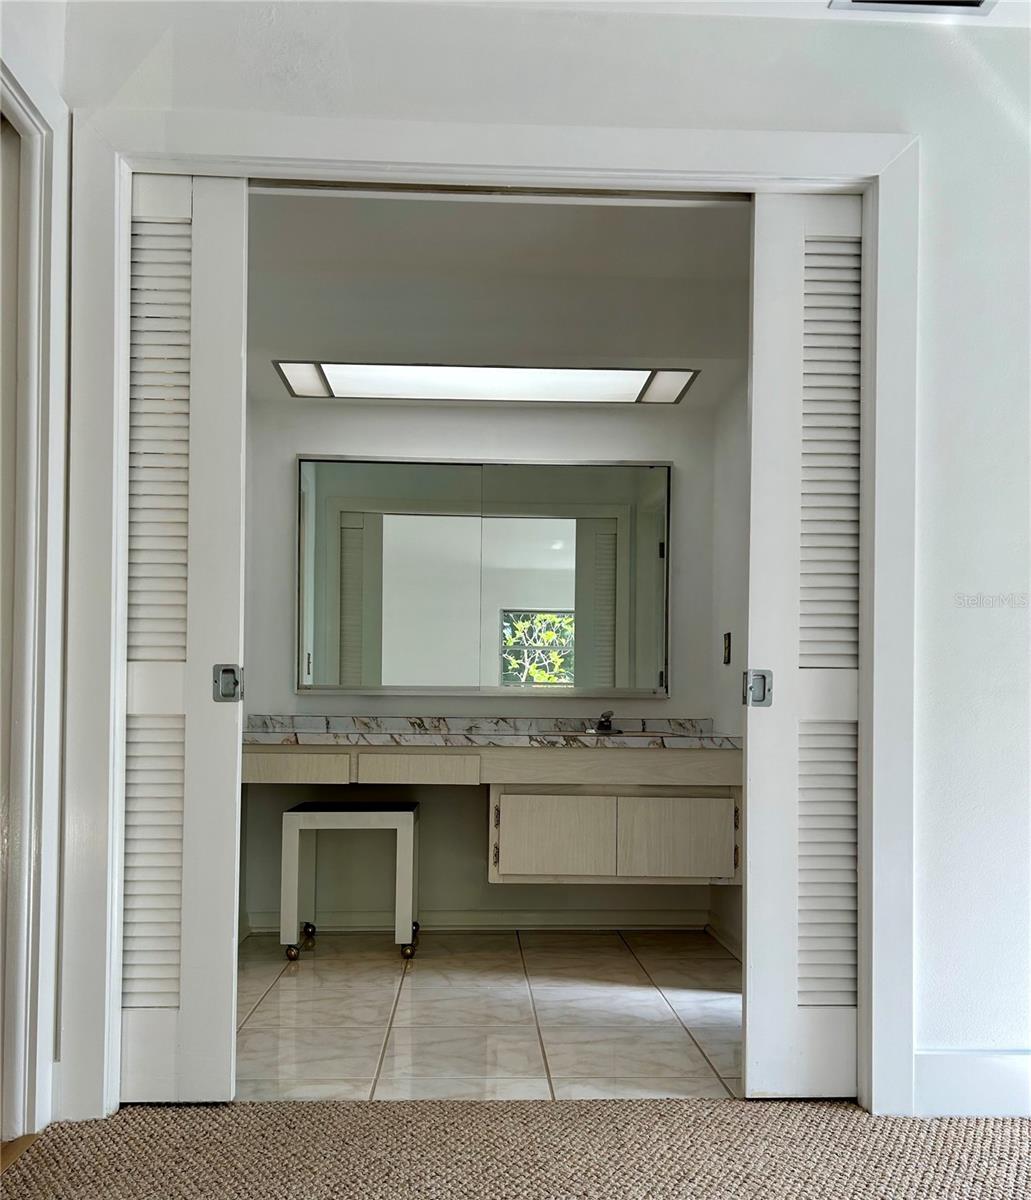 Blast from the past, this vanity area offers plenty of space, light, and large mirror for "getting ready"